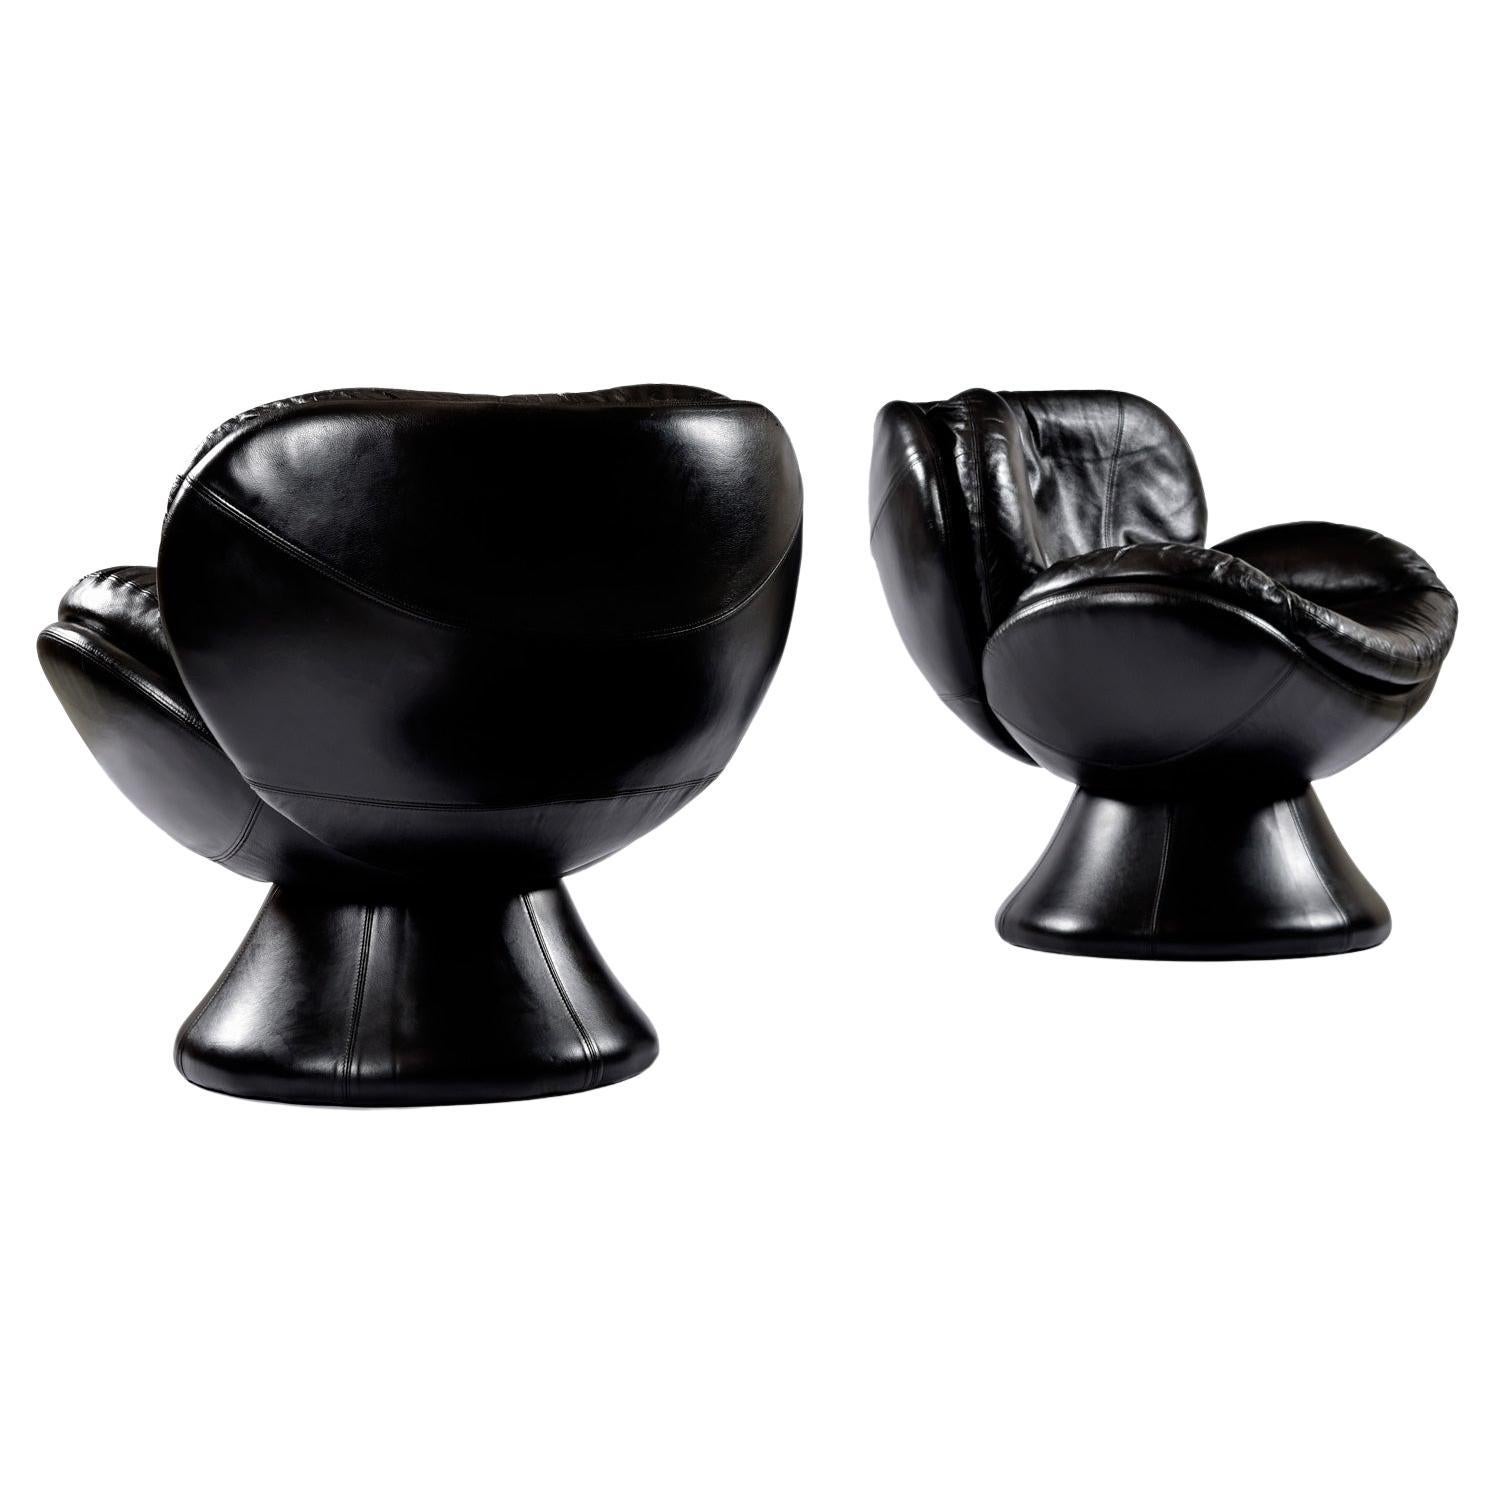  The Modernity Pedestal Base Black Leather Swivel Pod Chairs by Jaymar of Canada (en anglais seulement)